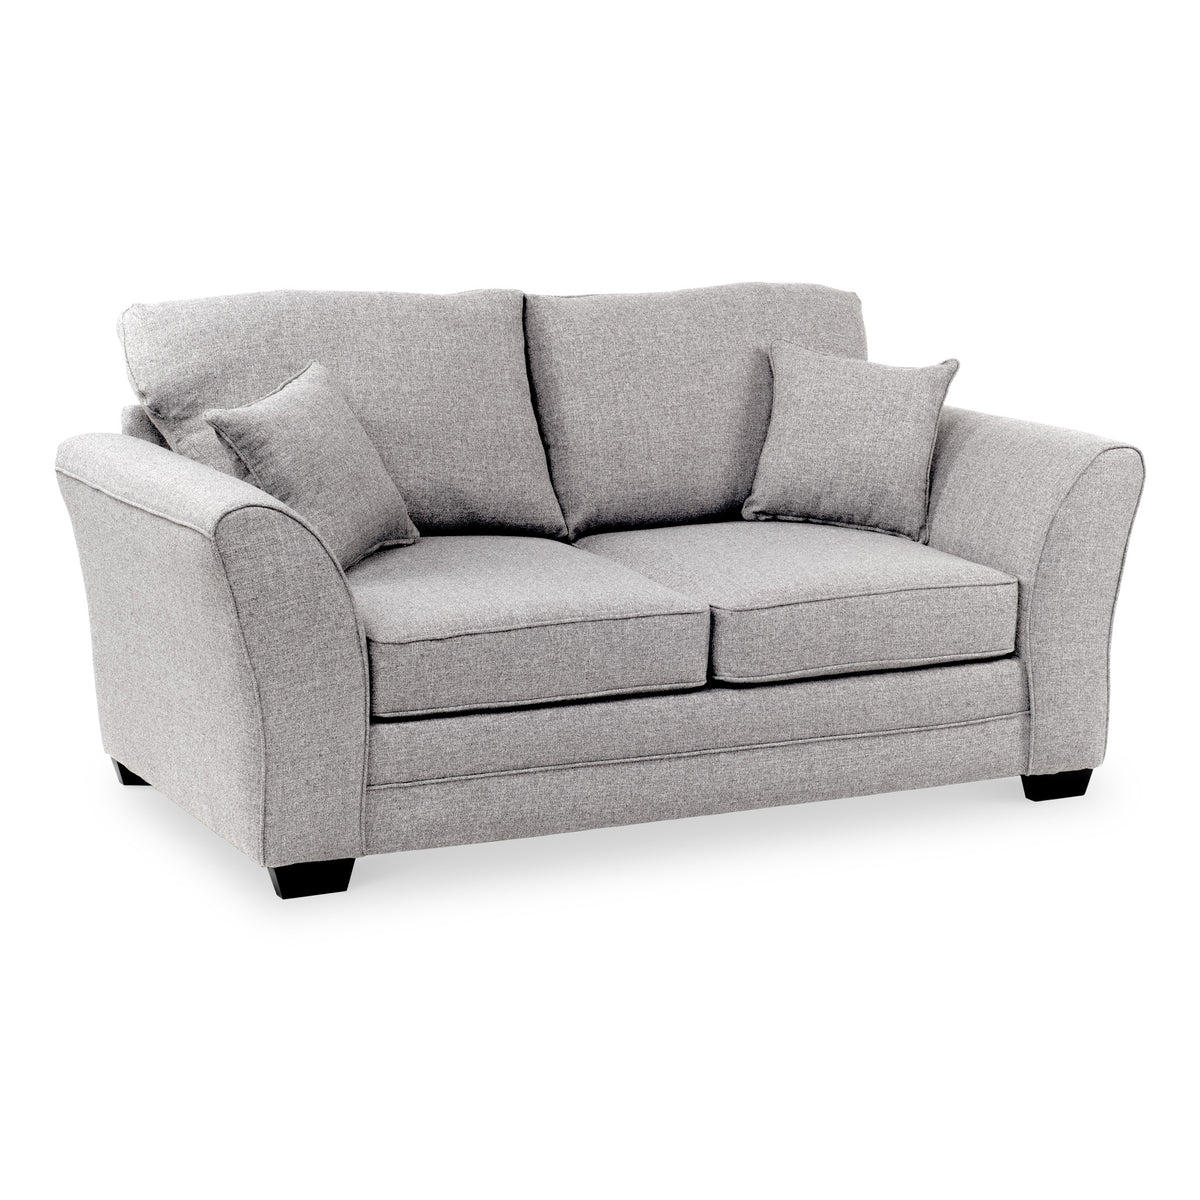 St Ives Corner Sofa Bed in Silver by Roseland Furniture